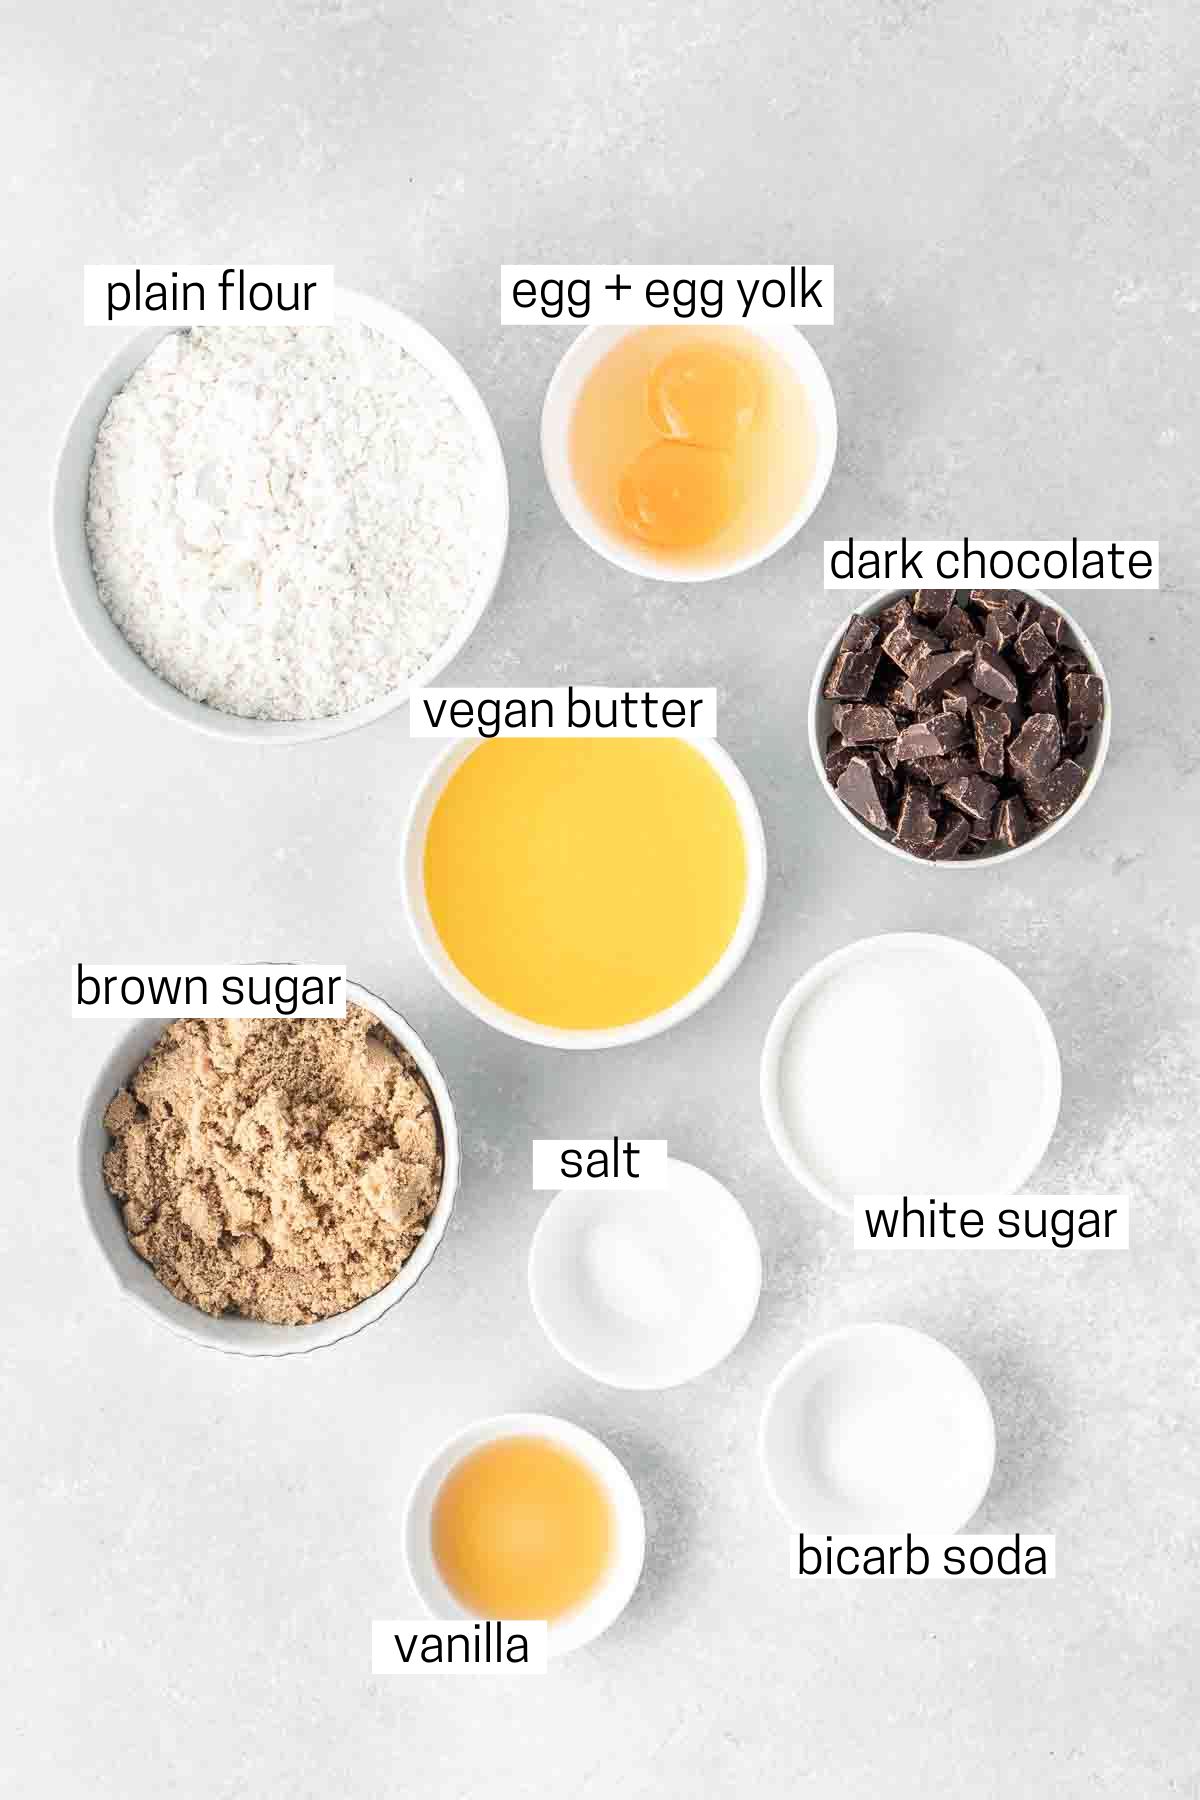 All ingredients needed for chocolate chip cookies laid out in small bowls.